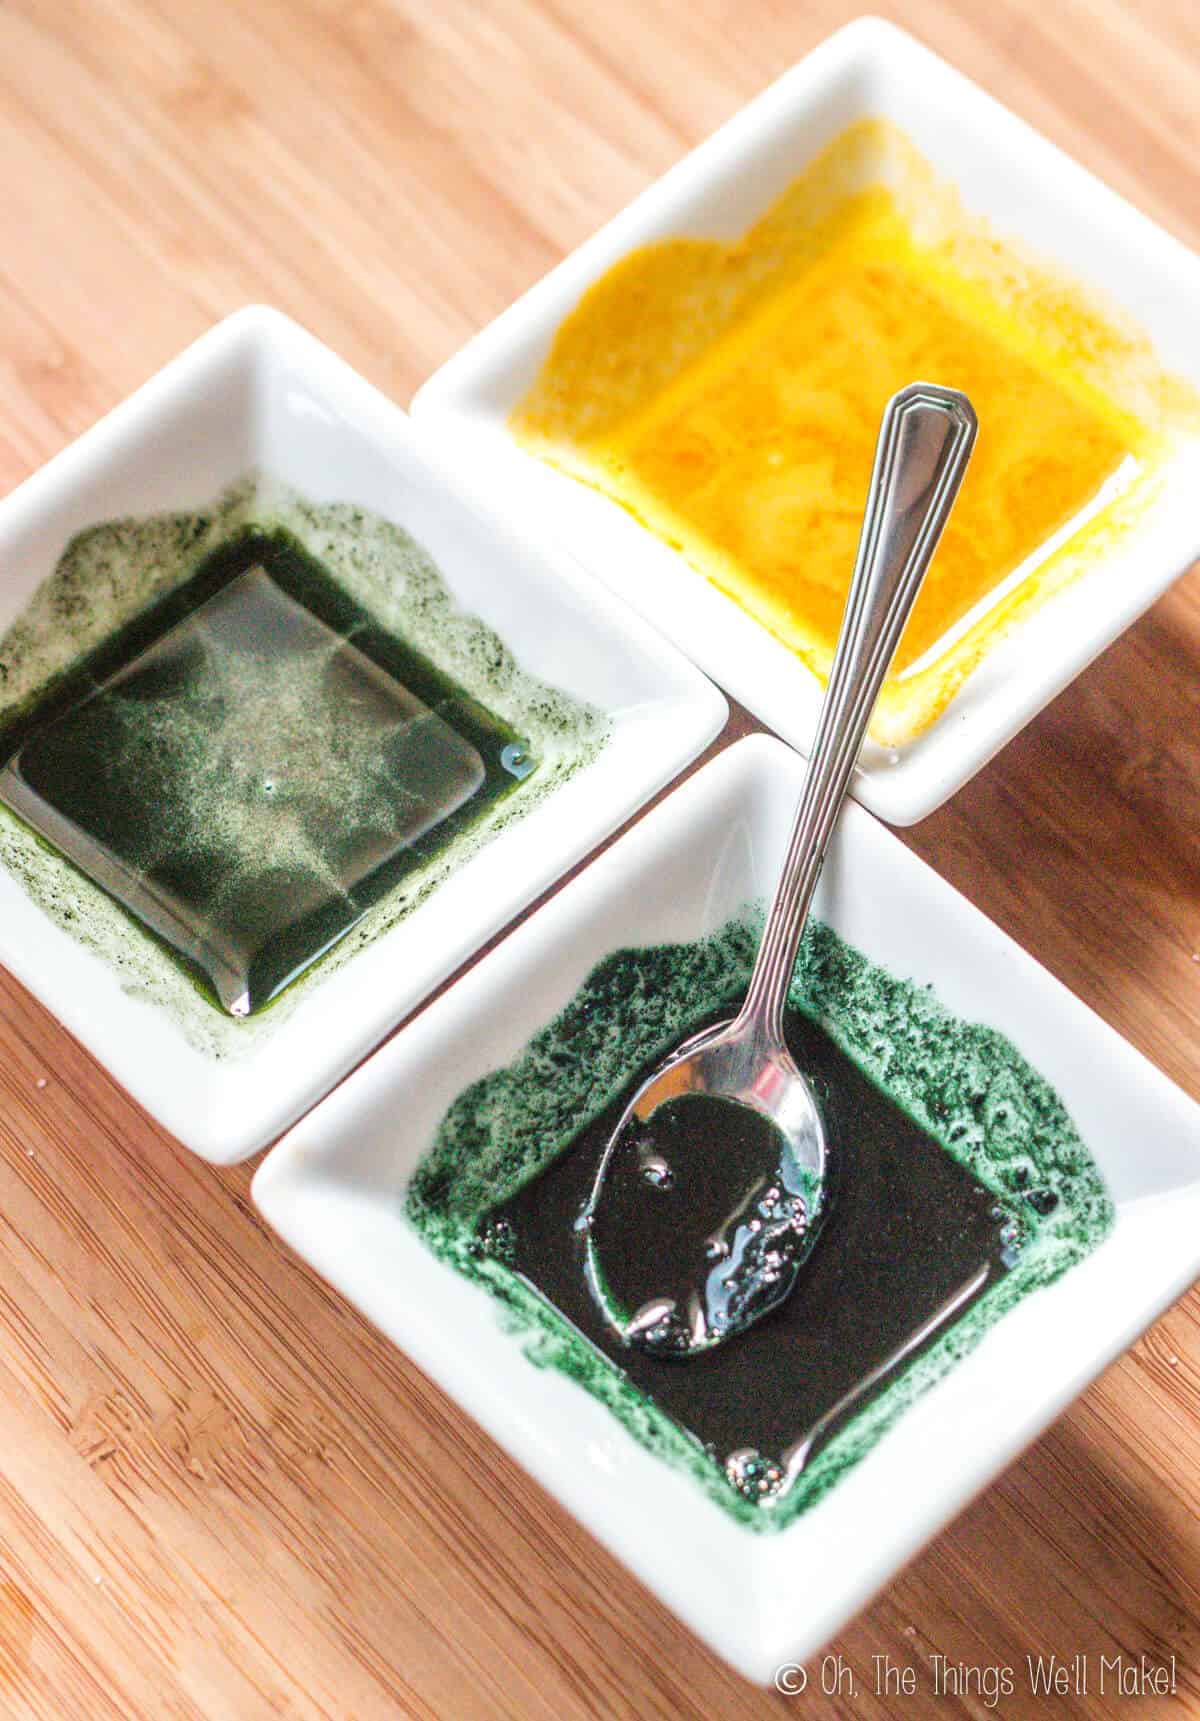 Overhead view of 2 green colorants and one yellow colorant in small white bowls